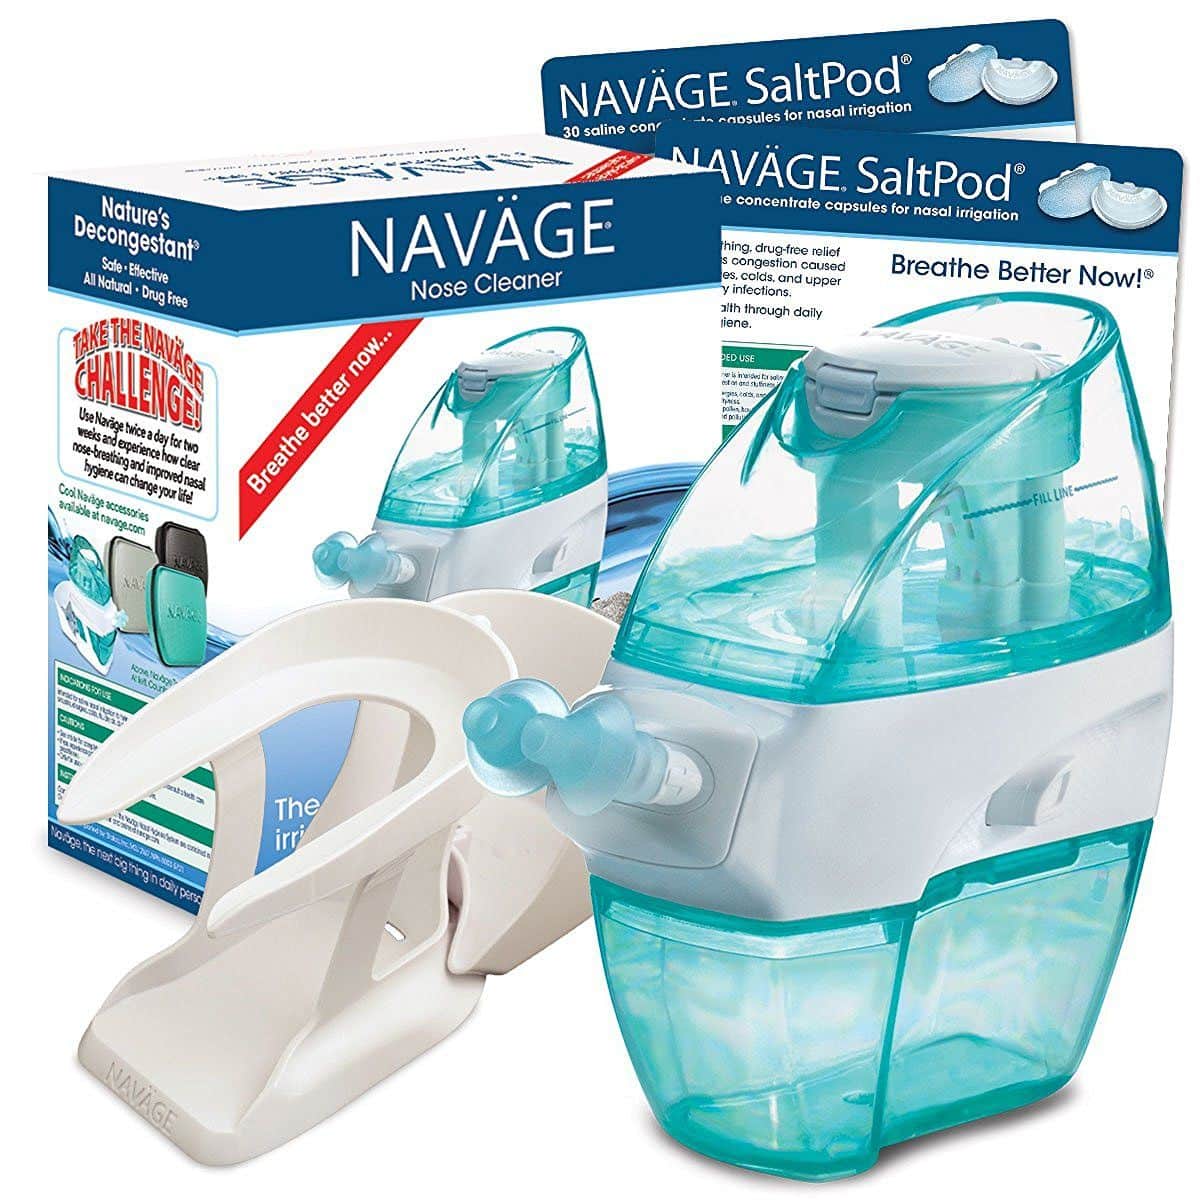 Navage Nasal Irrigation Review 2021 and Tests  Does it Really Work?